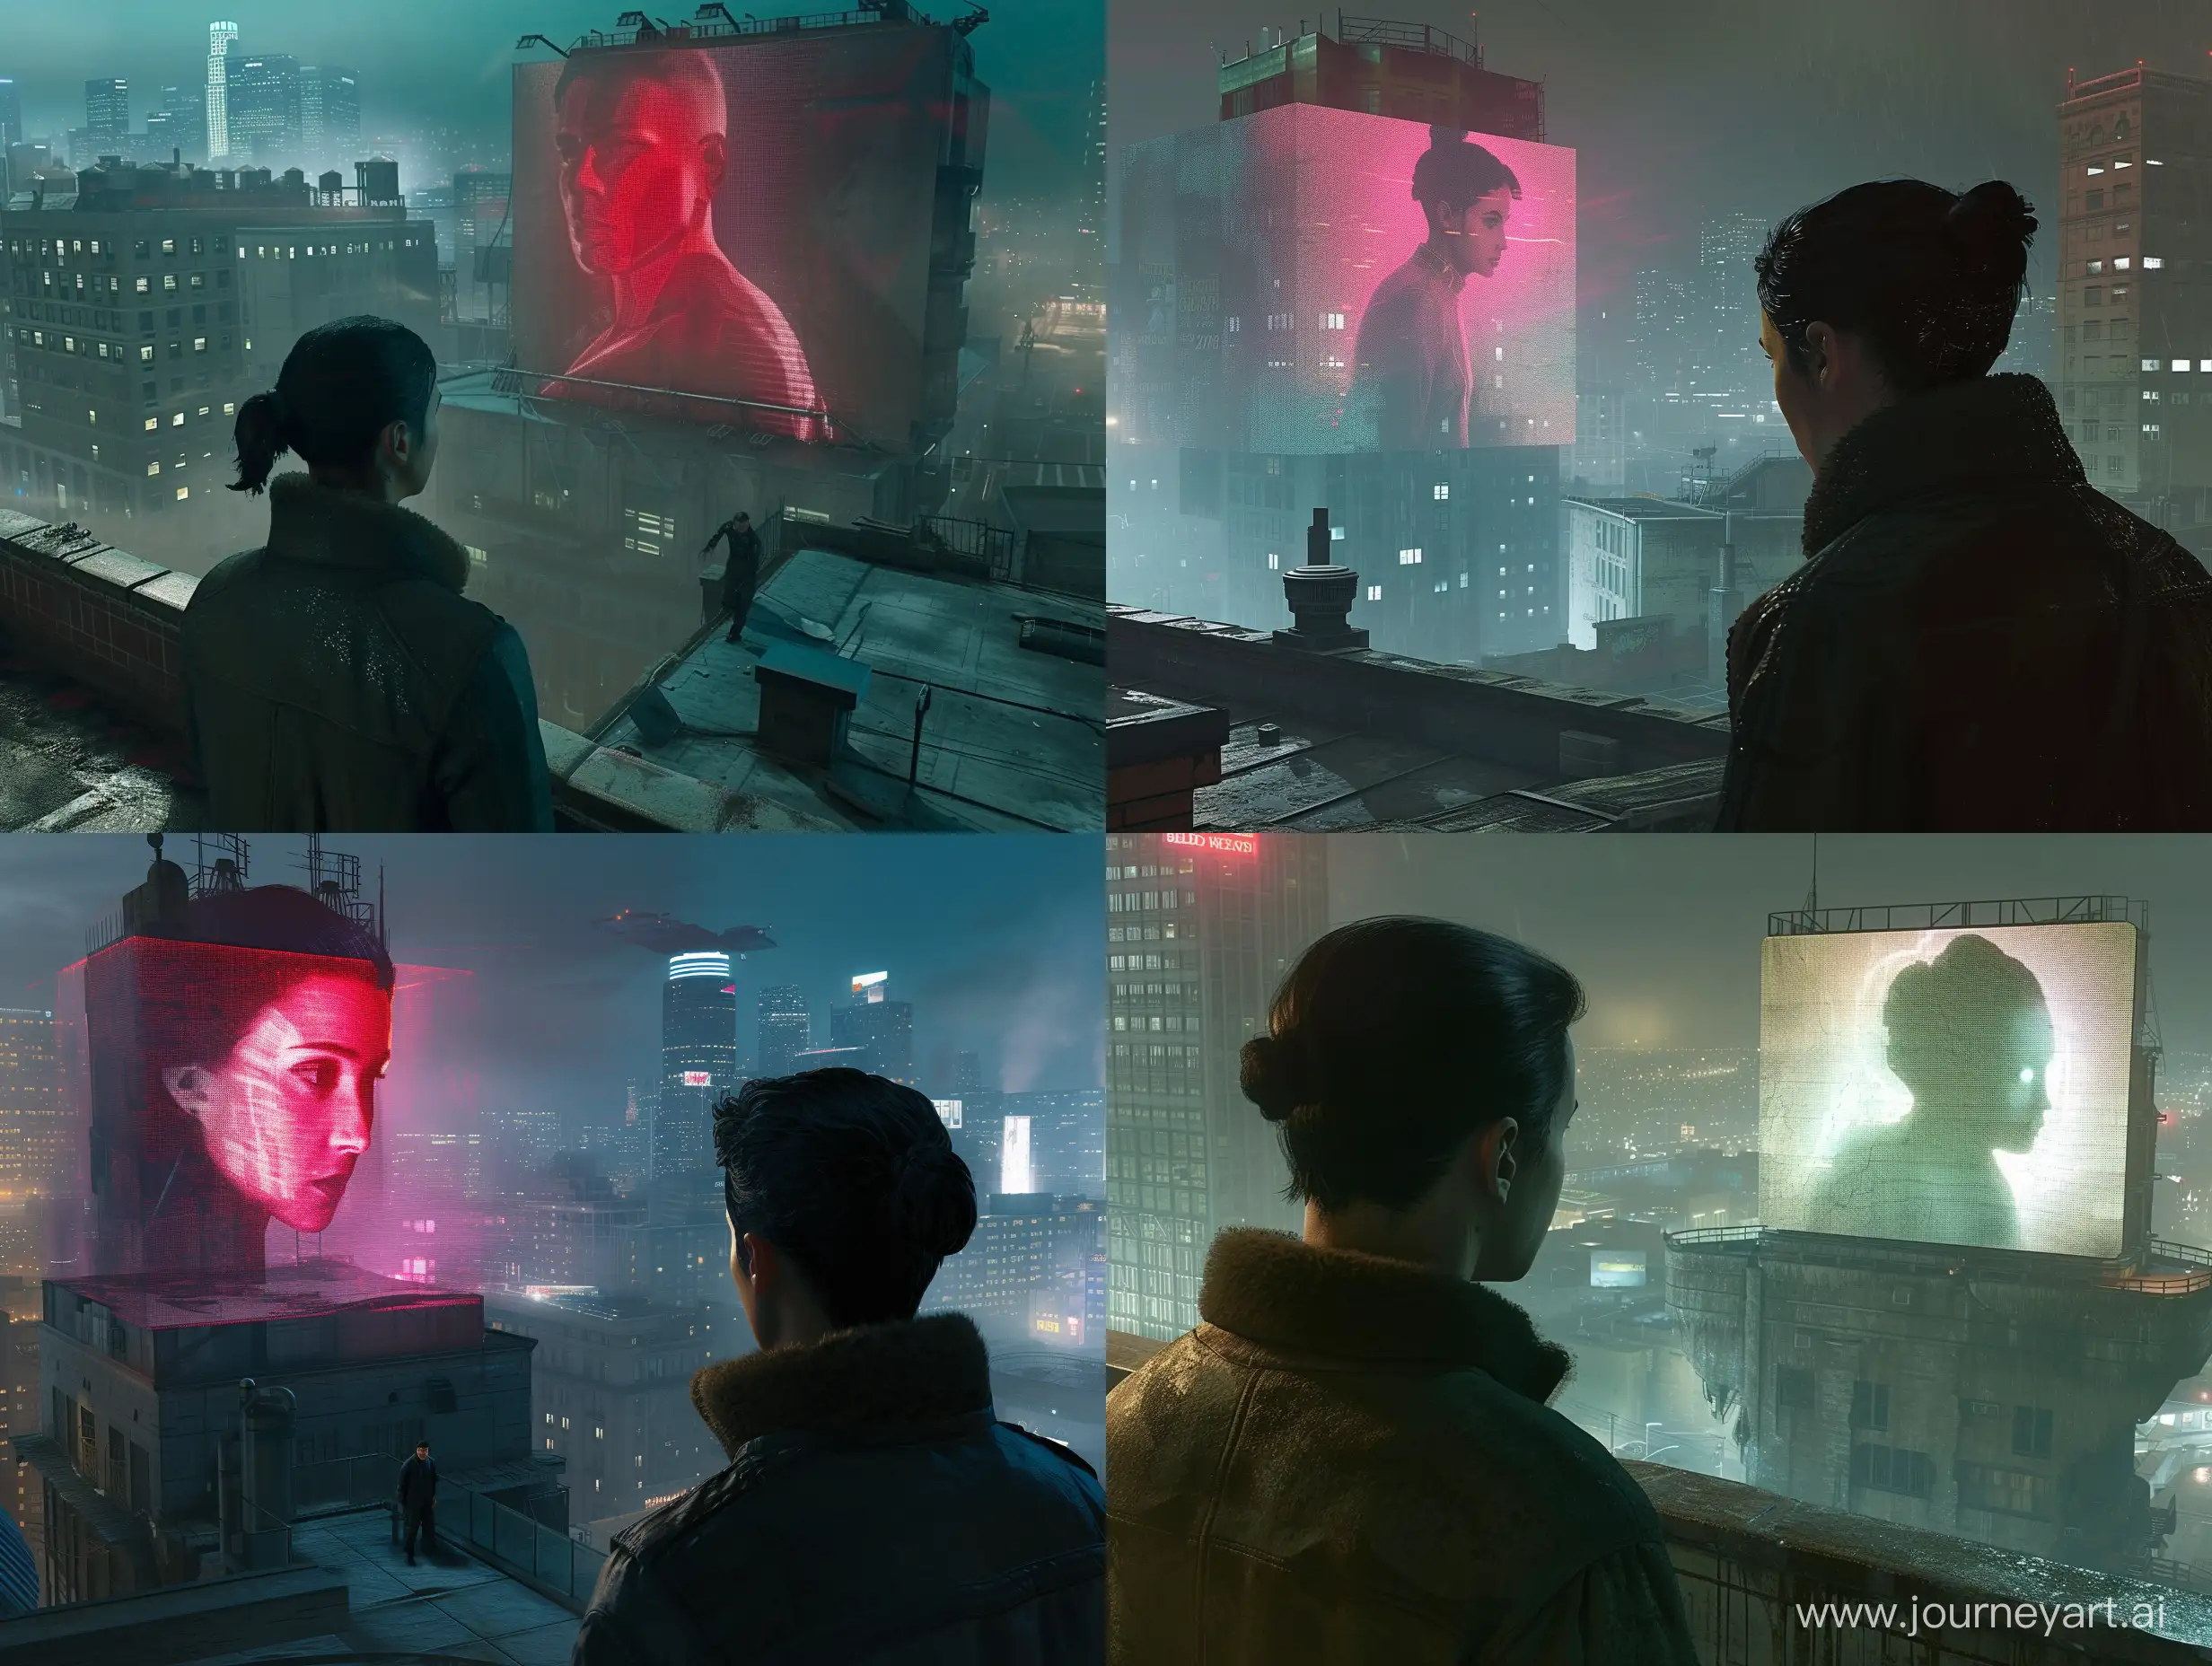 "Blade Runner 2049" is a video game set in a futuristic city in Los Angeles with advanced ray tracing visuals, featuring a third-person perspective. Specifically designed for the PS5, this version highlights the main character, portrayed by Ryan Gosling, as he explores a rooftop environment and observes a colossal holographic woman on a distant building, delivering a vast open-world adventure powered by the Unreal Engine, all set in a nighttime backdrop.